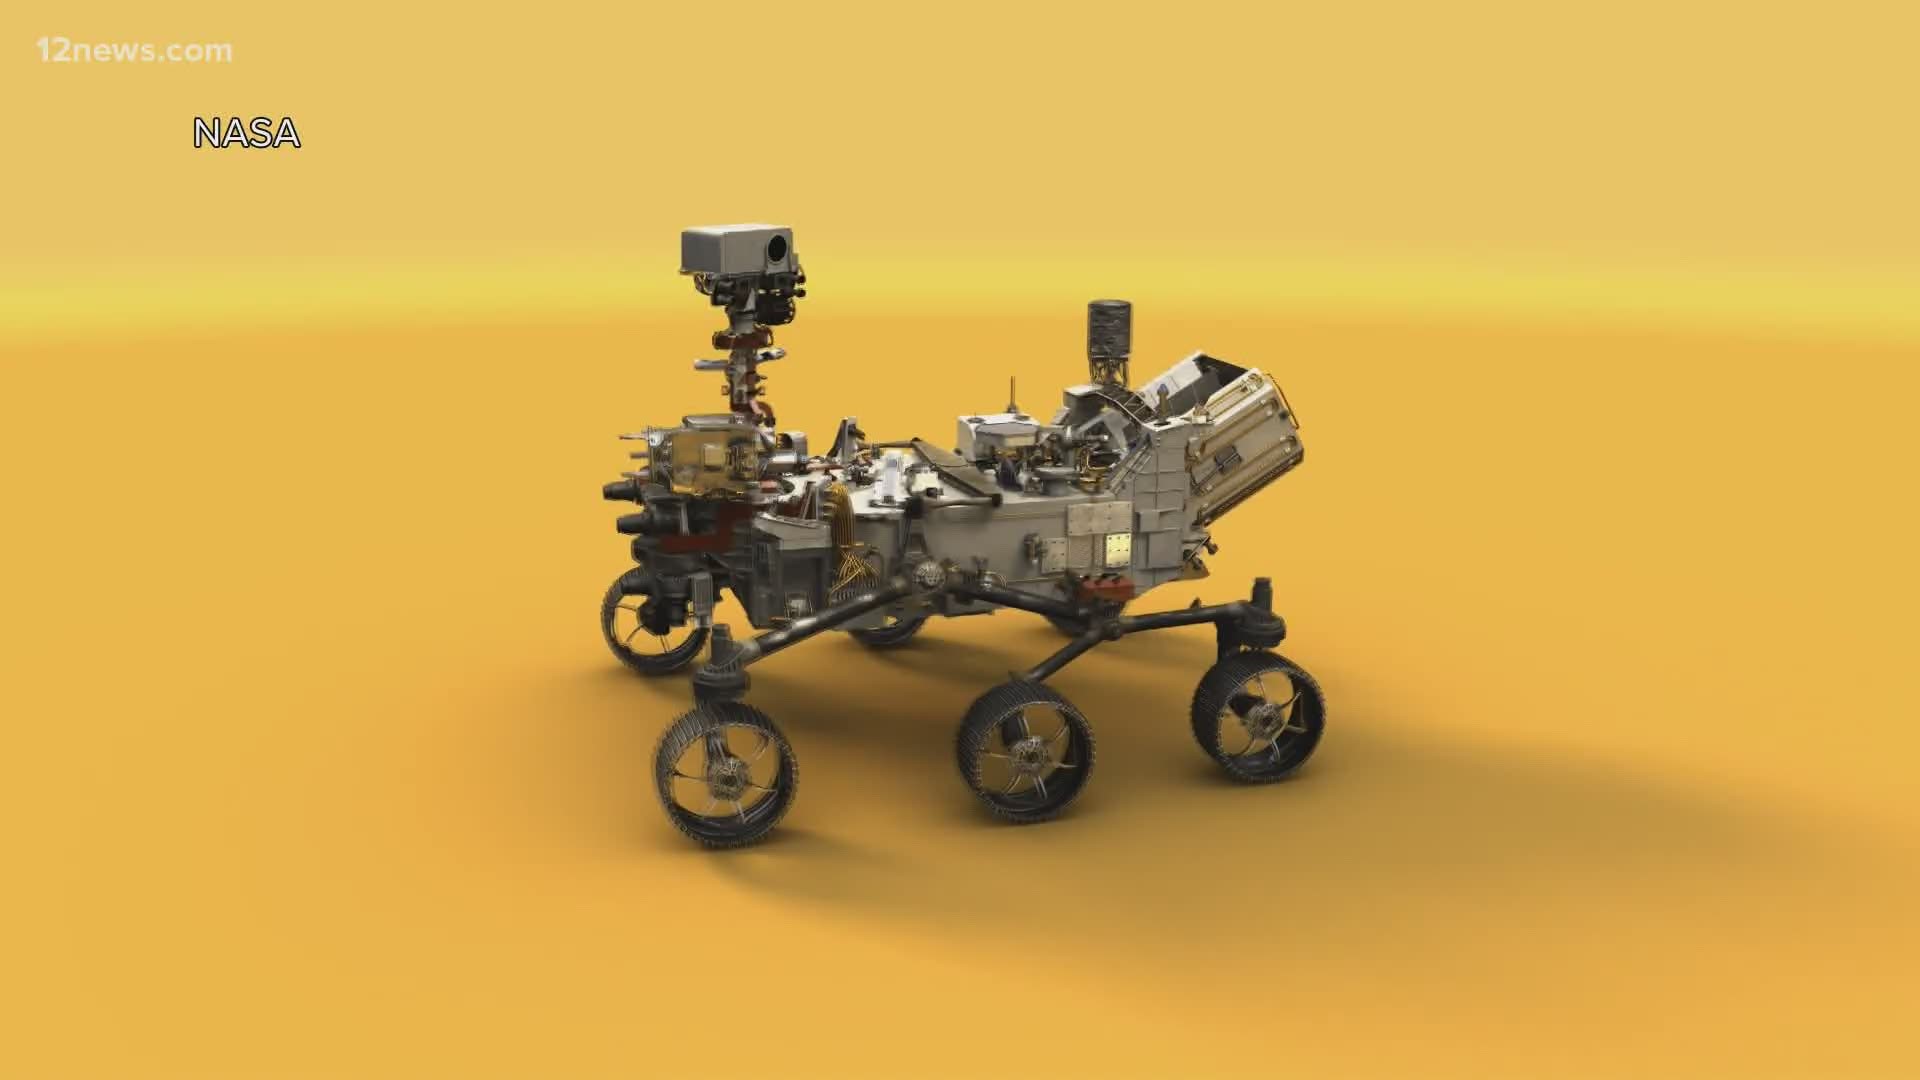 Sometime this summer, NASA will launch a new robotic rover toward Mars. It'll be carrying a camera system operated by scientists at Arizona State University.